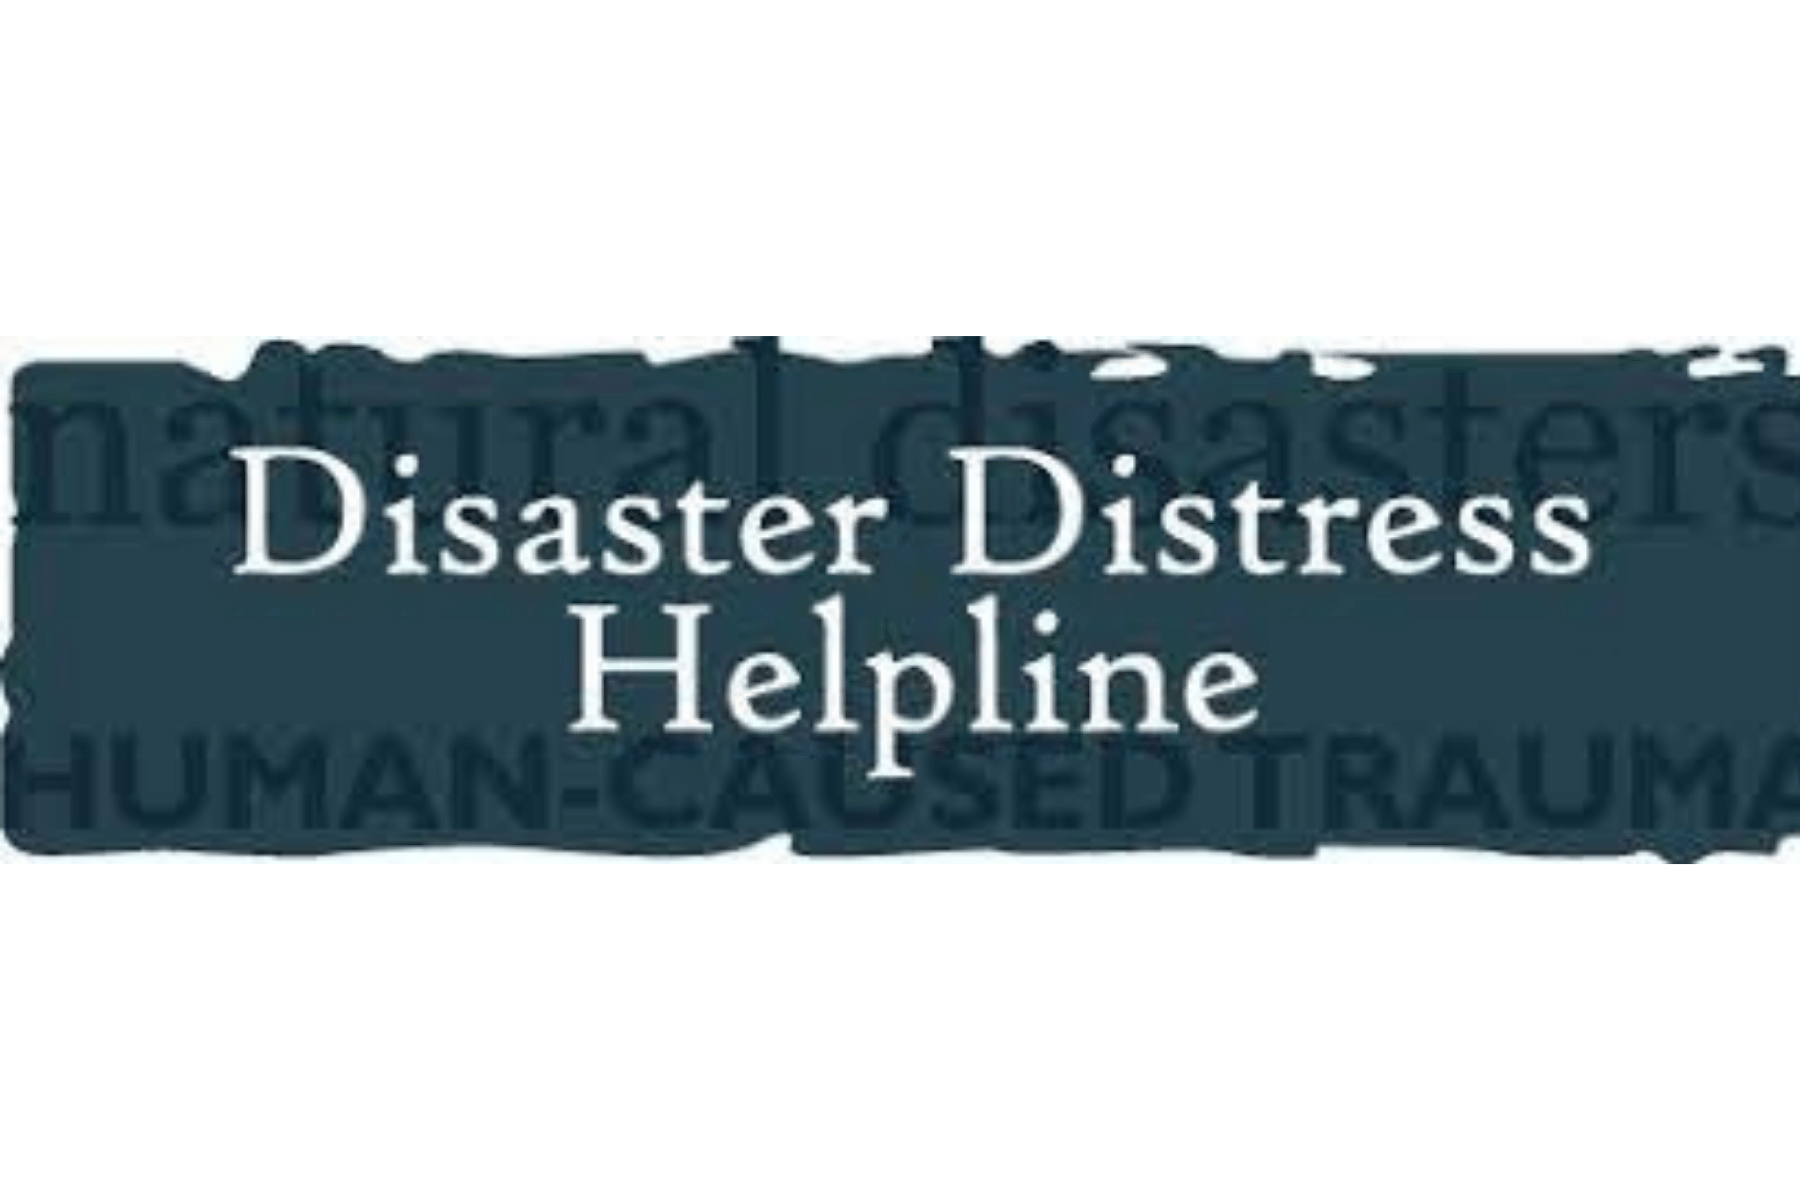 navy blue and white disaster distress helpline